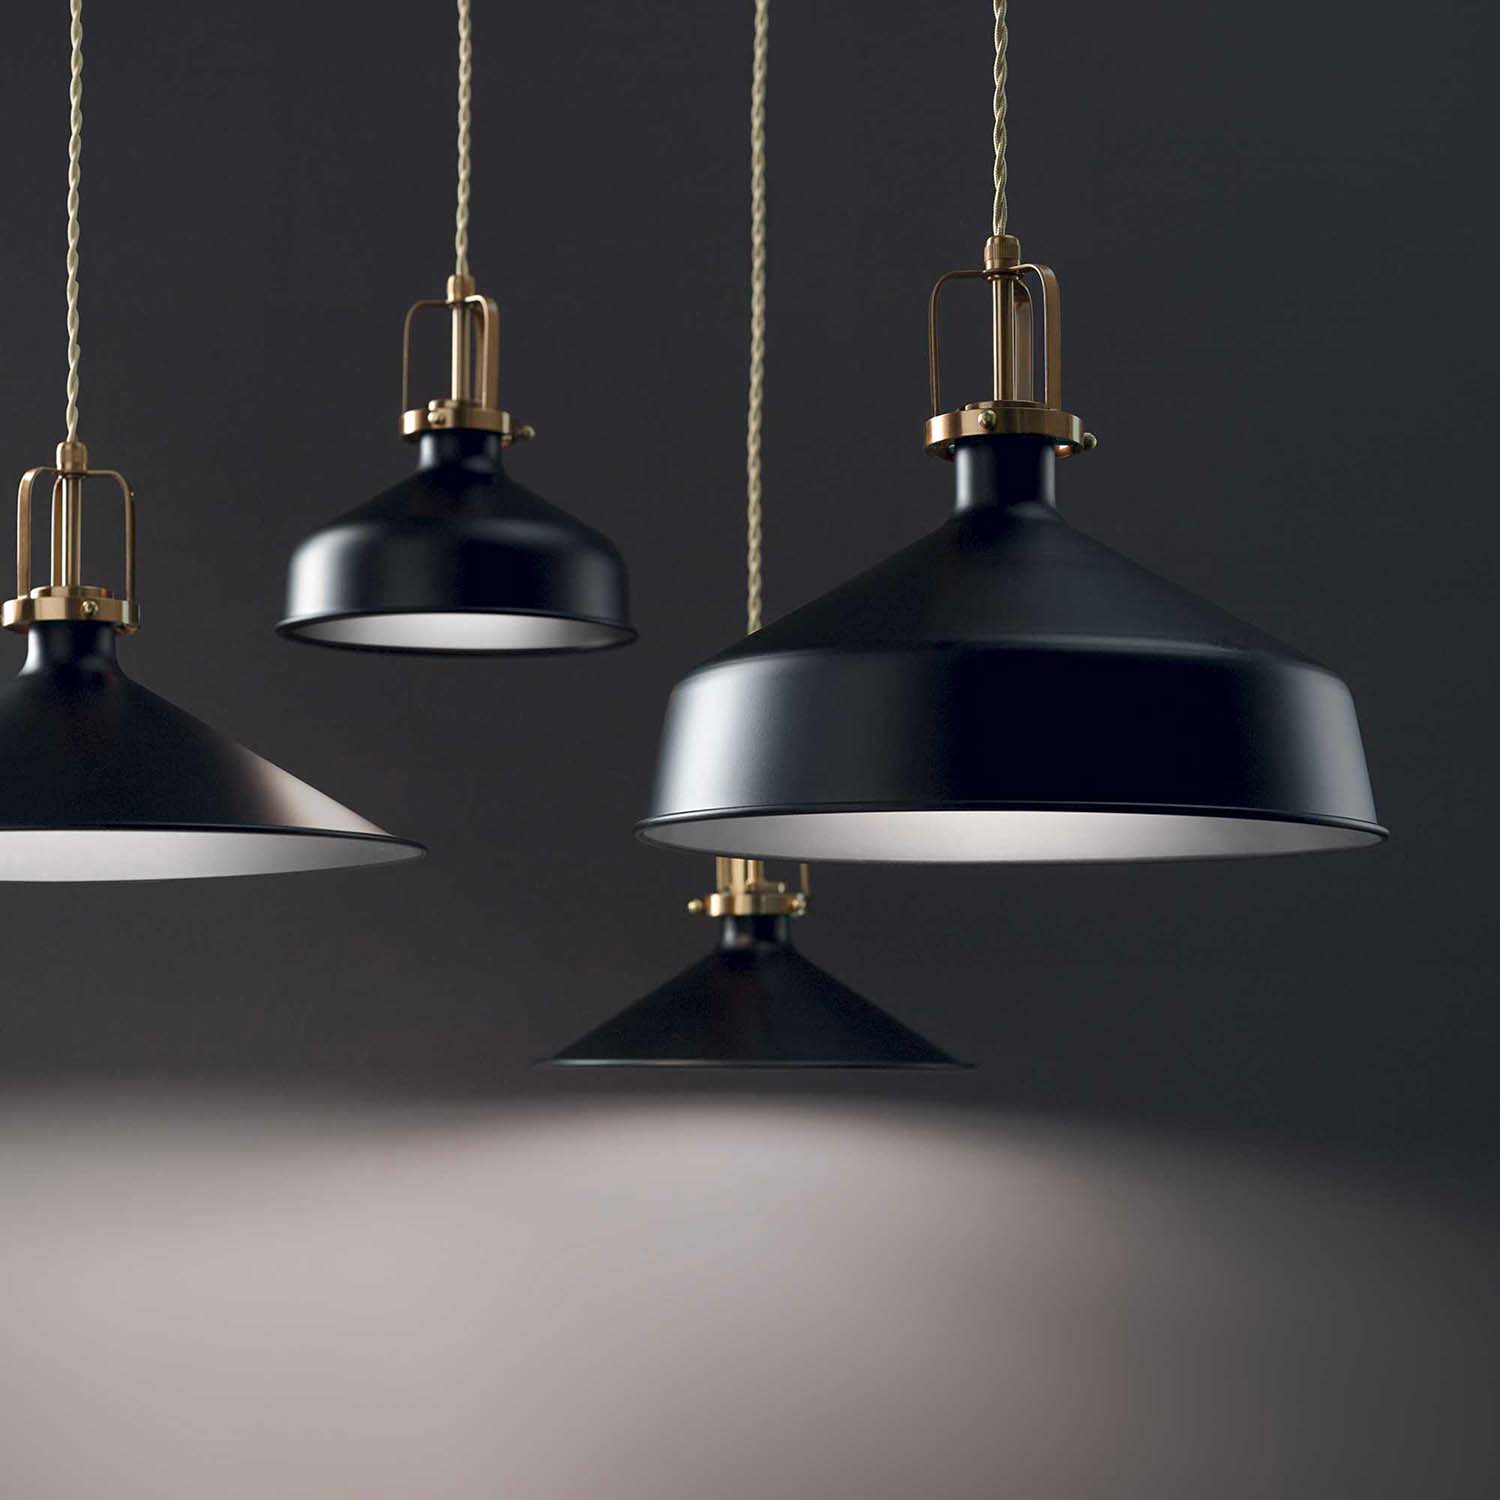 ERIS - Industrial pendant light in black or white steel and brass